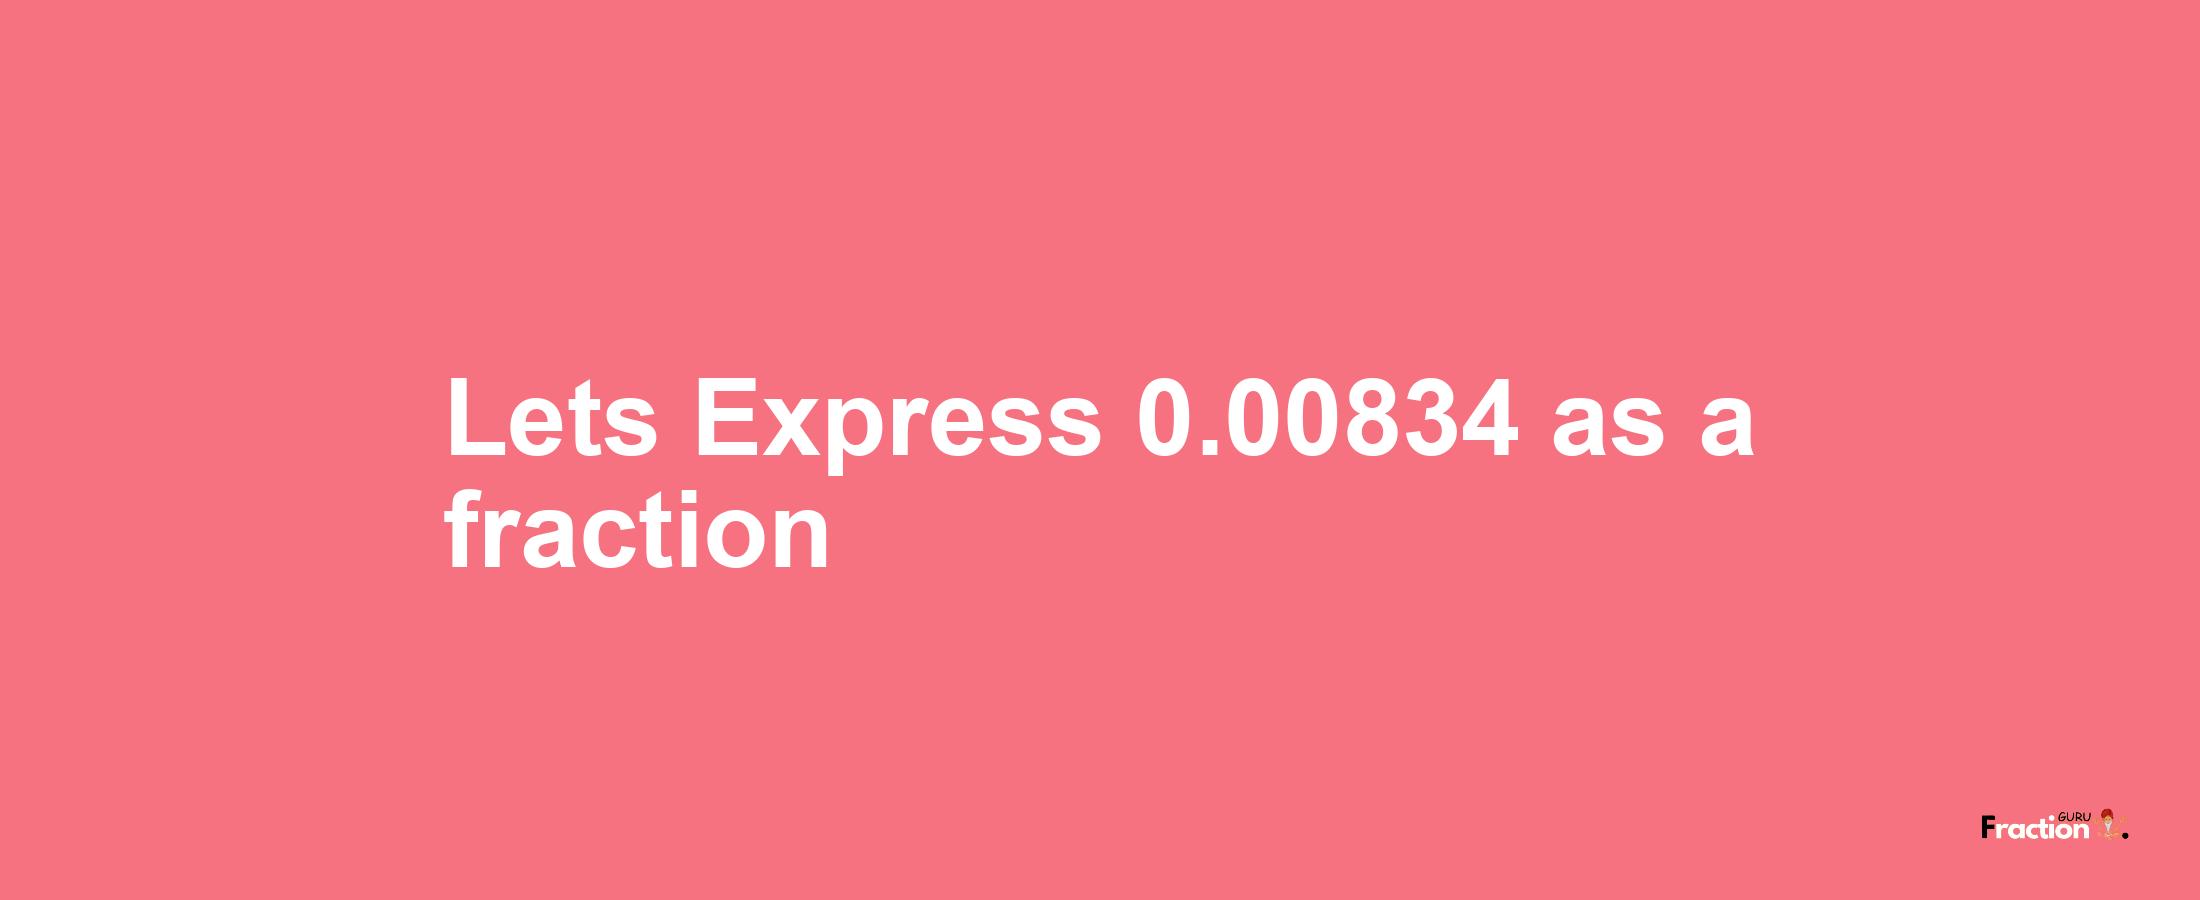 Lets Express 0.00834 as afraction